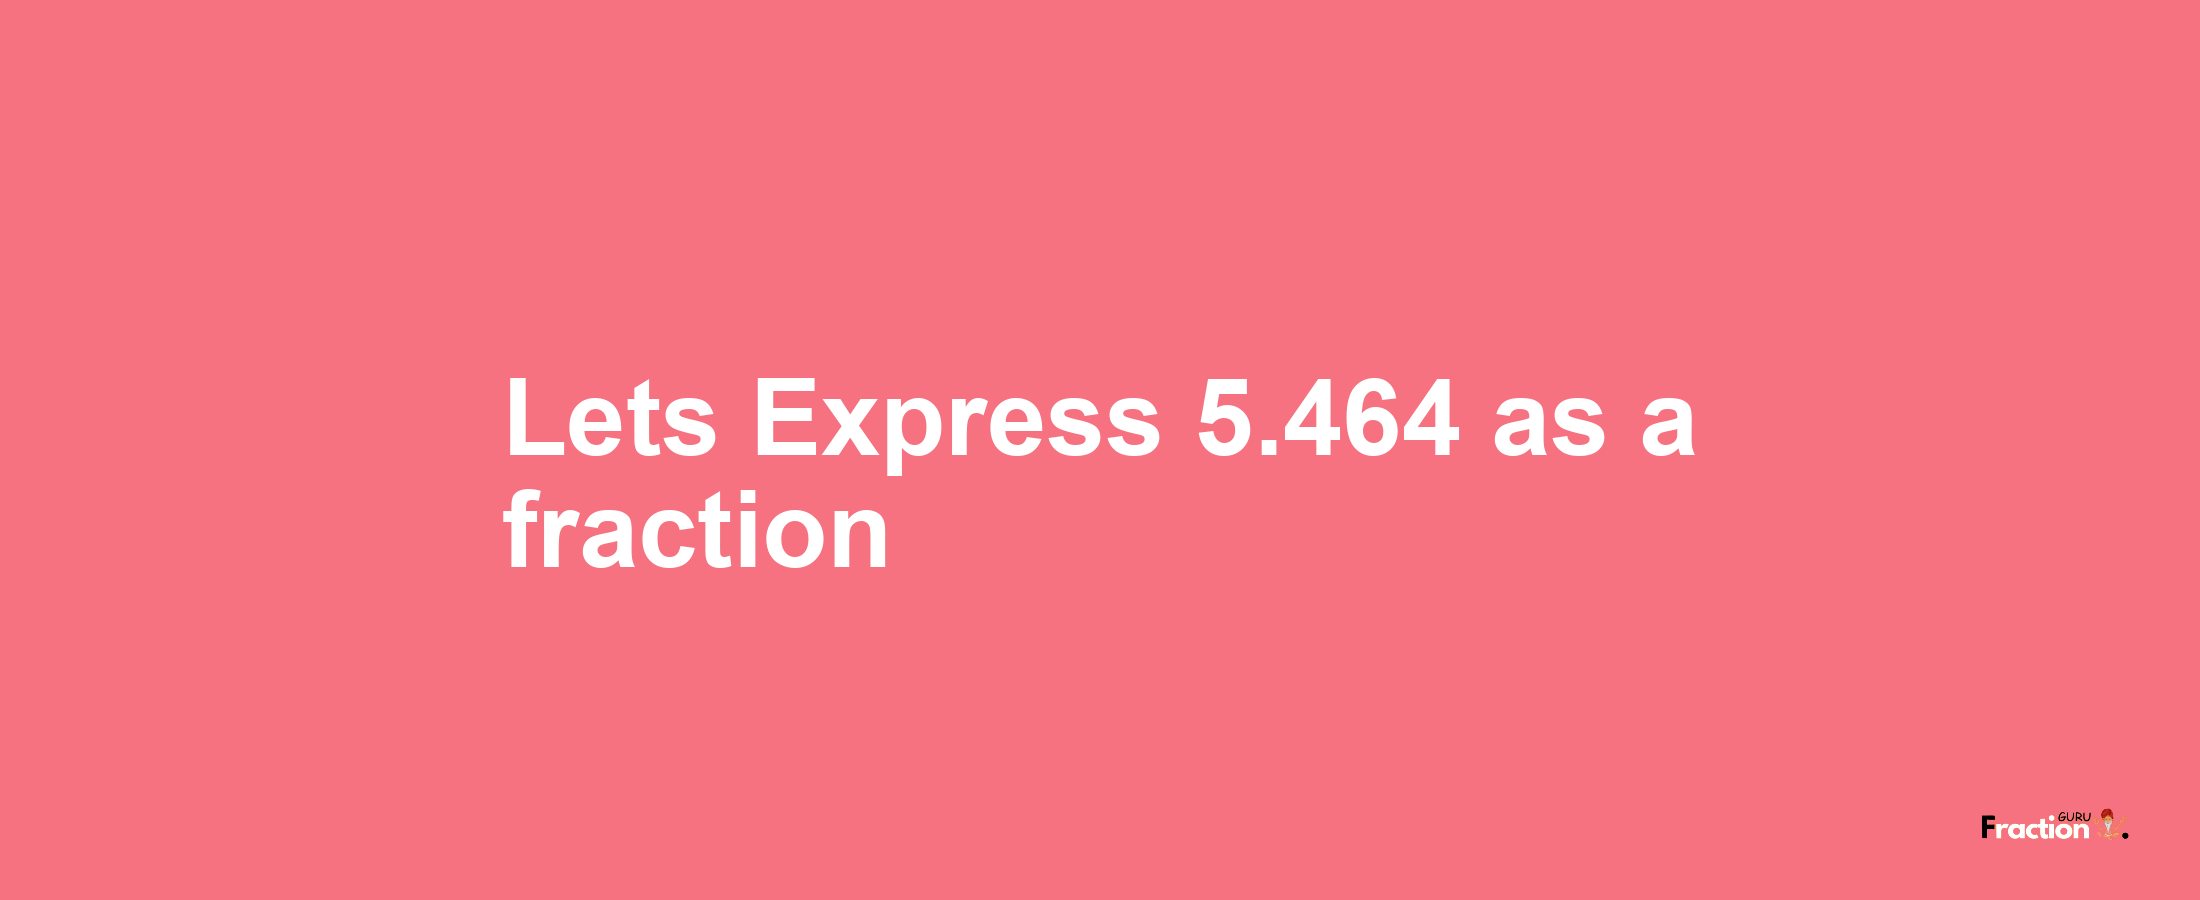 Lets Express 5.464 as afraction